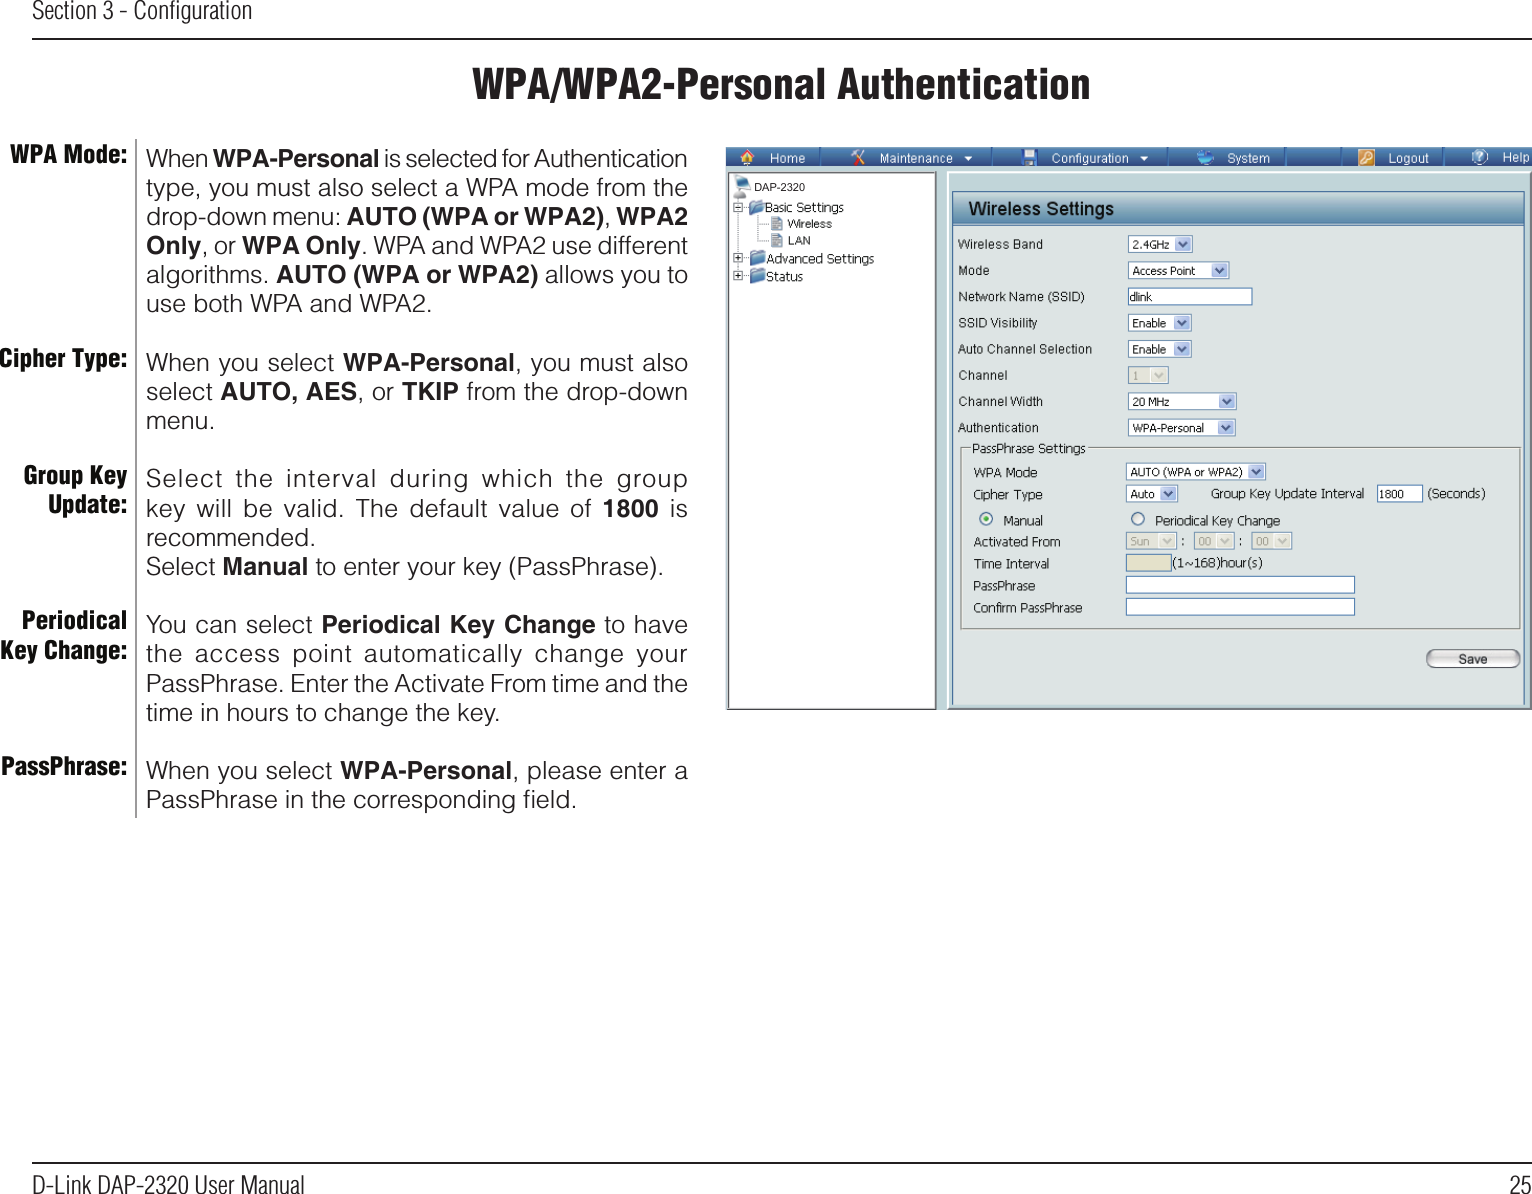 25D-Link DAP-2320 User ManualSection 3 - ConﬁgurationWPA/WPA2-Personal AuthenticationWhen WPA-Personal is selected for Authentication type, you must also select a WPA mode from the drop-down menu: AUTO (WPA or WPA2), WPA2 Only, or WPA Only. WPA and WPA2 use different algorithms. AUTO (WPA or WPA2) allows you to use both WPA and WPA2.When you select WPA-Personal, you must also select AUTO, AES, or TKIP from the drop-down menu.Select  the  interval  during  which  the  group key  will  be  valid.  The  default  value  of  1800  is recommended.Select Manual to enter your key (PassPhrase). You can select Periodical Key Change to have the  access  point  automatically  change  your PassPhrase. Enter the Activate From time and the time in hours to change the key.When you select WPA-Personal, please enter a PassPhrase in the corresponding ﬁeld.WPA Mode: Cipher Type:Group Key Update:Periodical Key Change:PassPhrase:DAP-2320